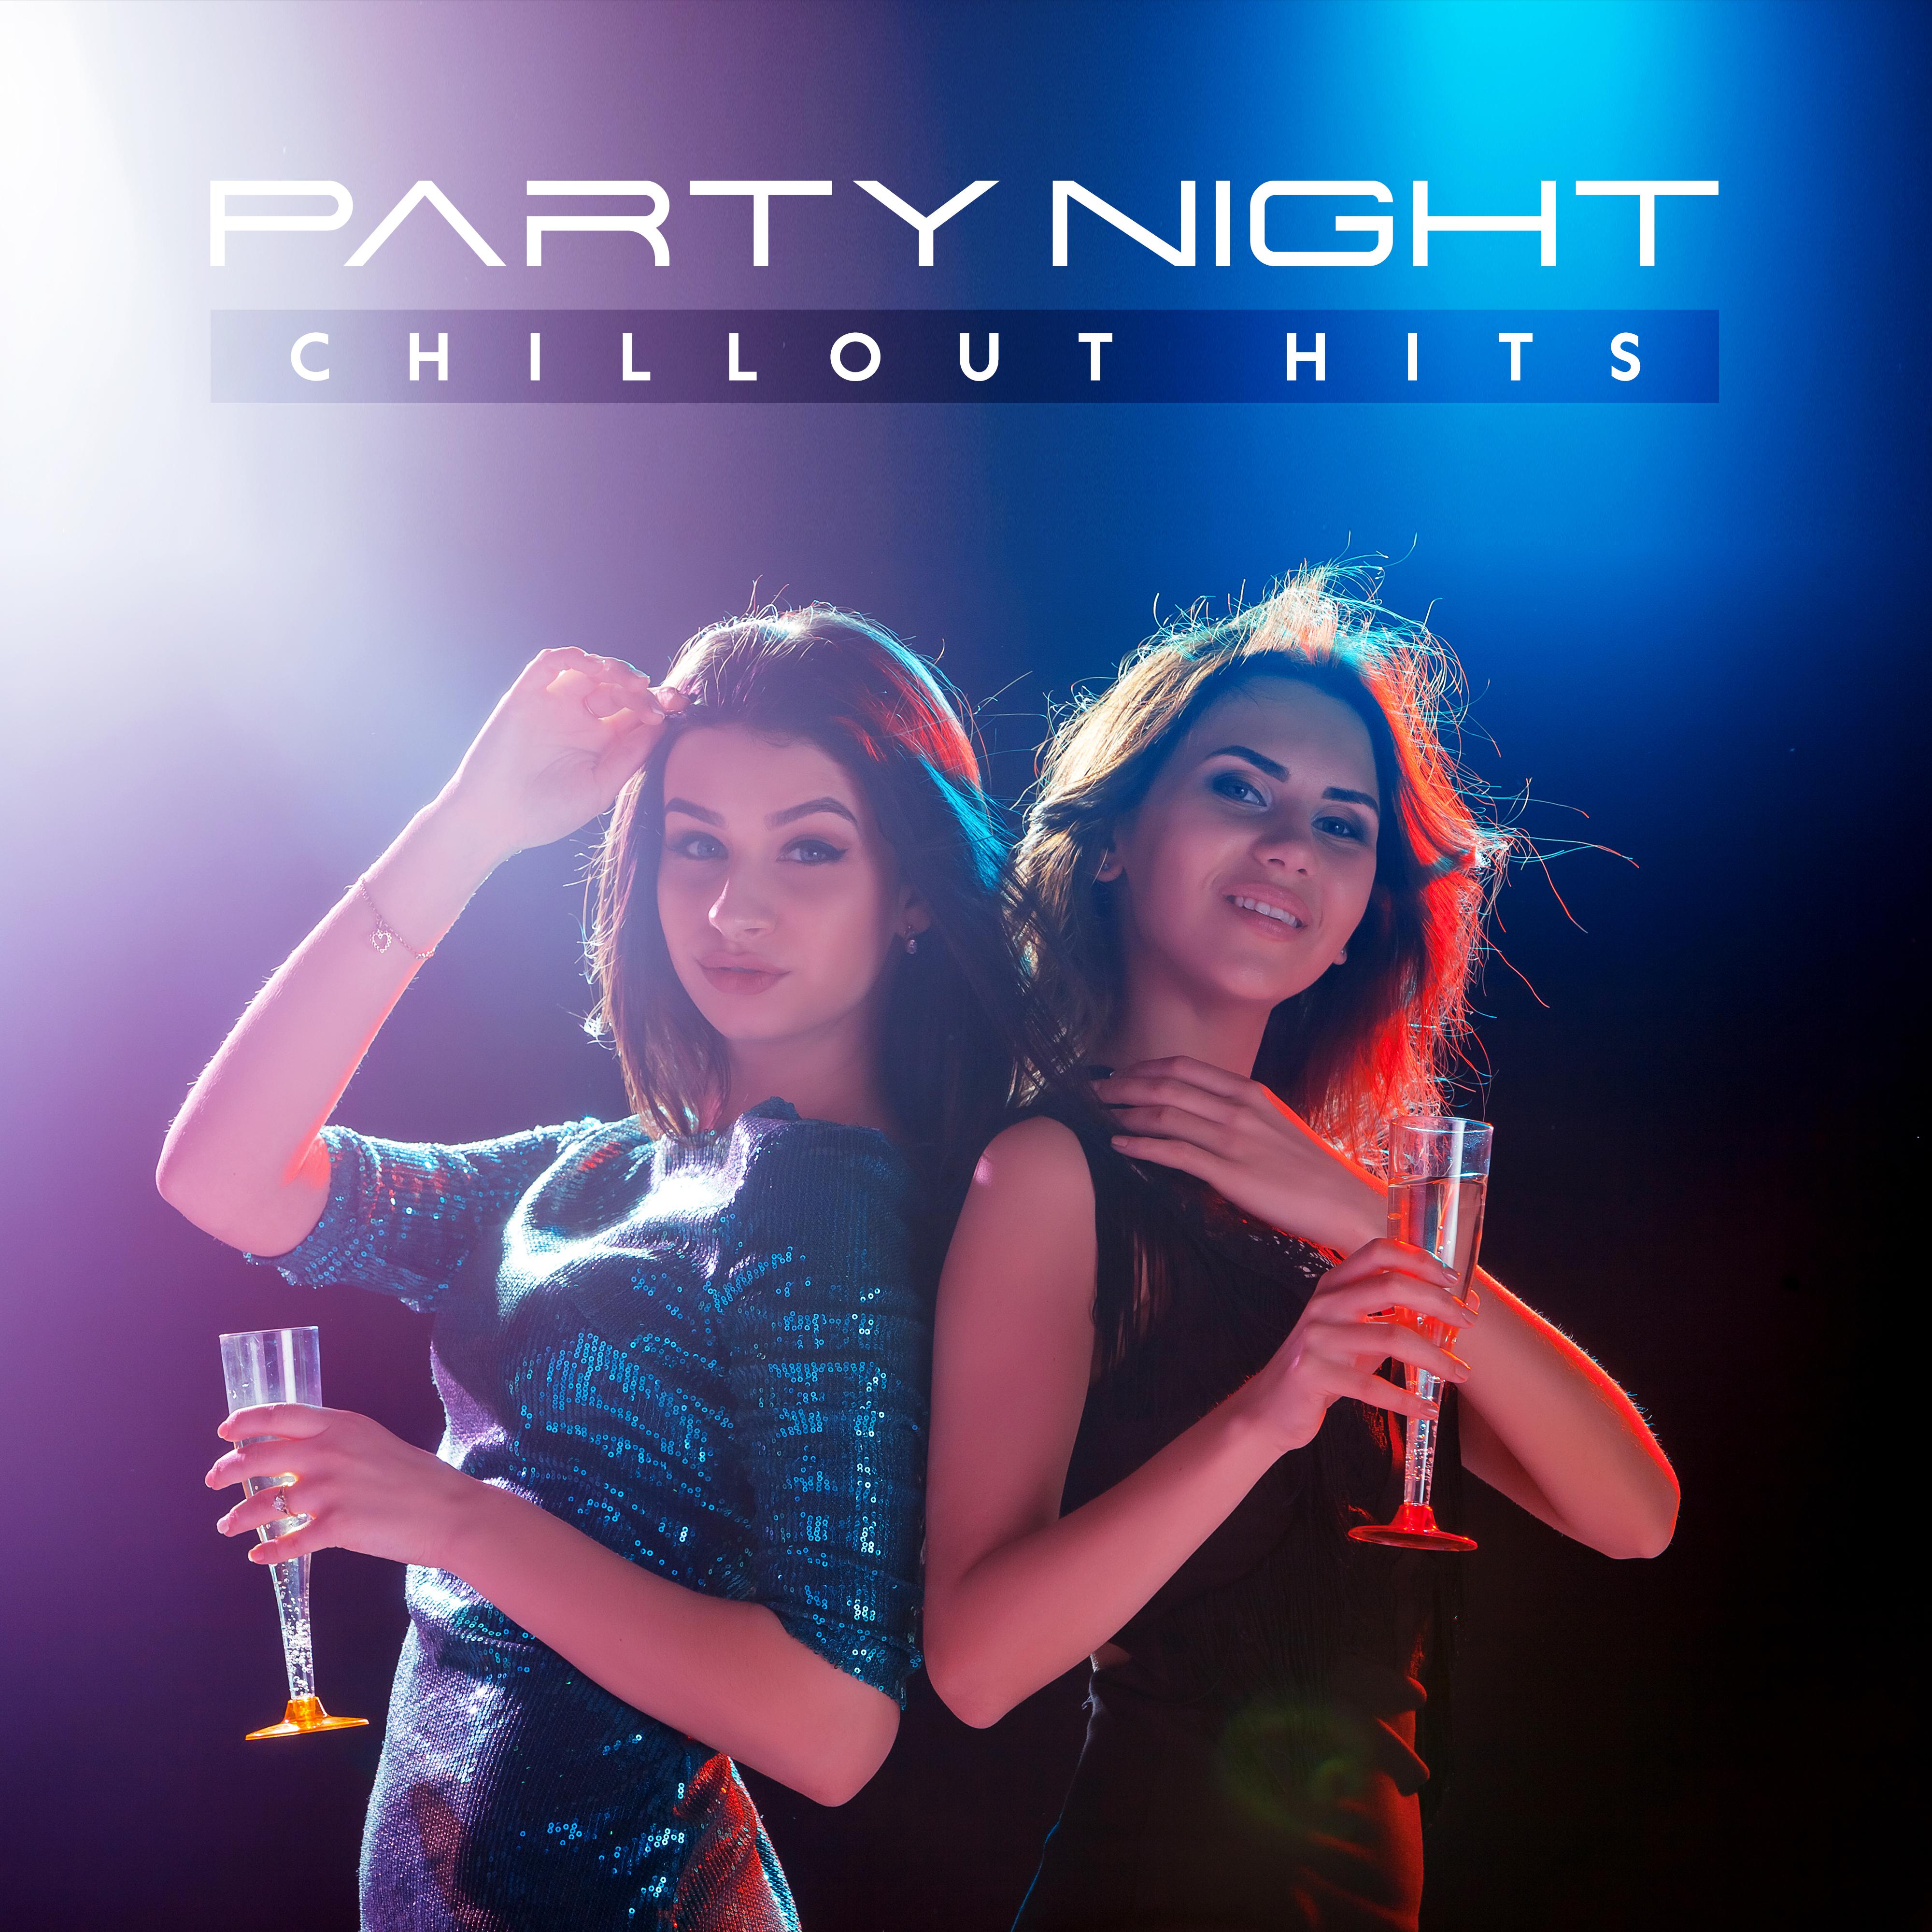 Party Night Chillout Hits – Compilation of Top Chill Out Electronic Slow Music for Night Party in the Club or at Home, Deep Beats with Electro Melodies, Hot Summer Holiday Dance Party